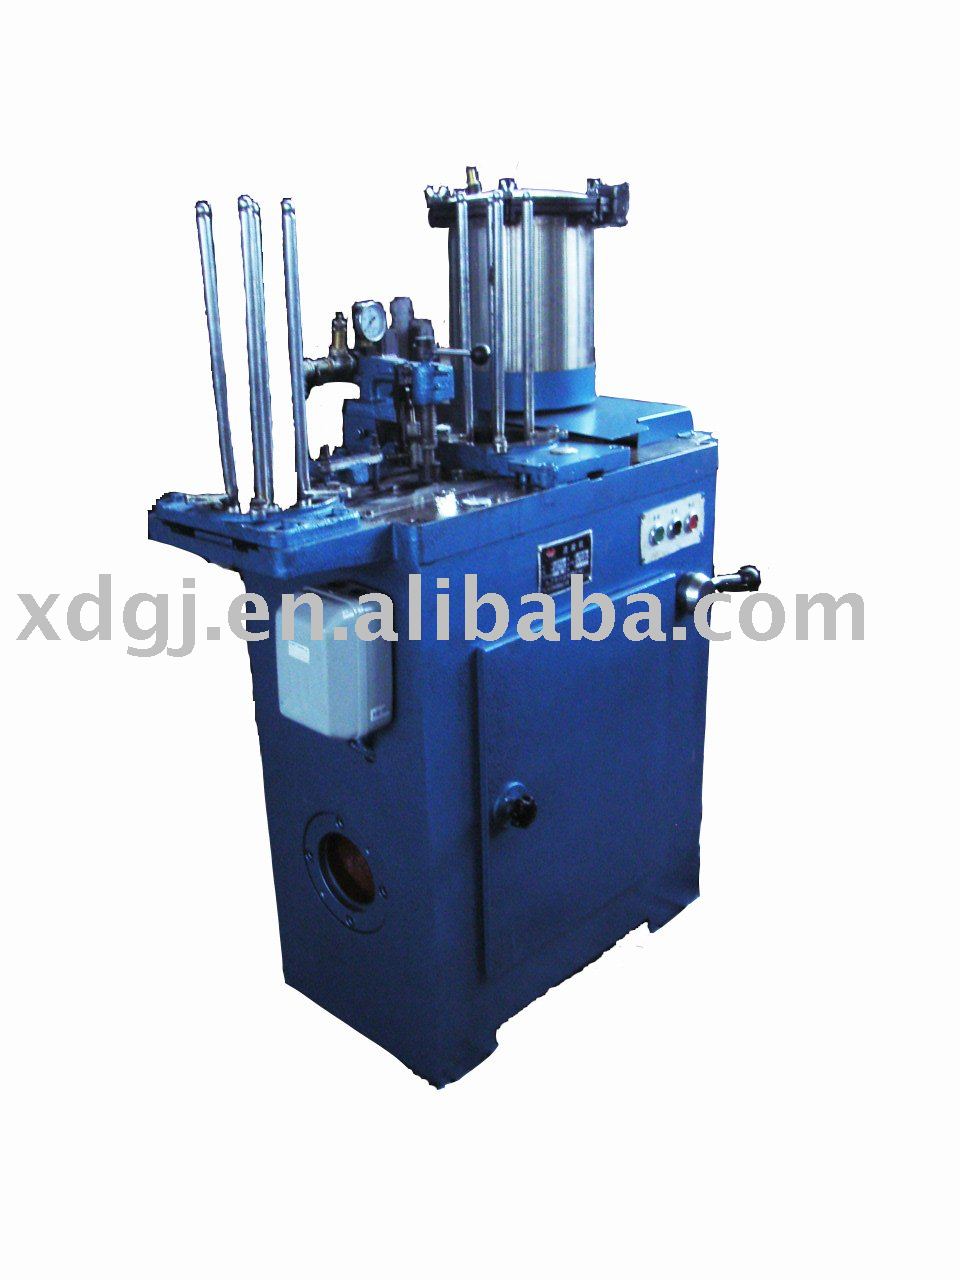 tin can cover/lid gluing machine